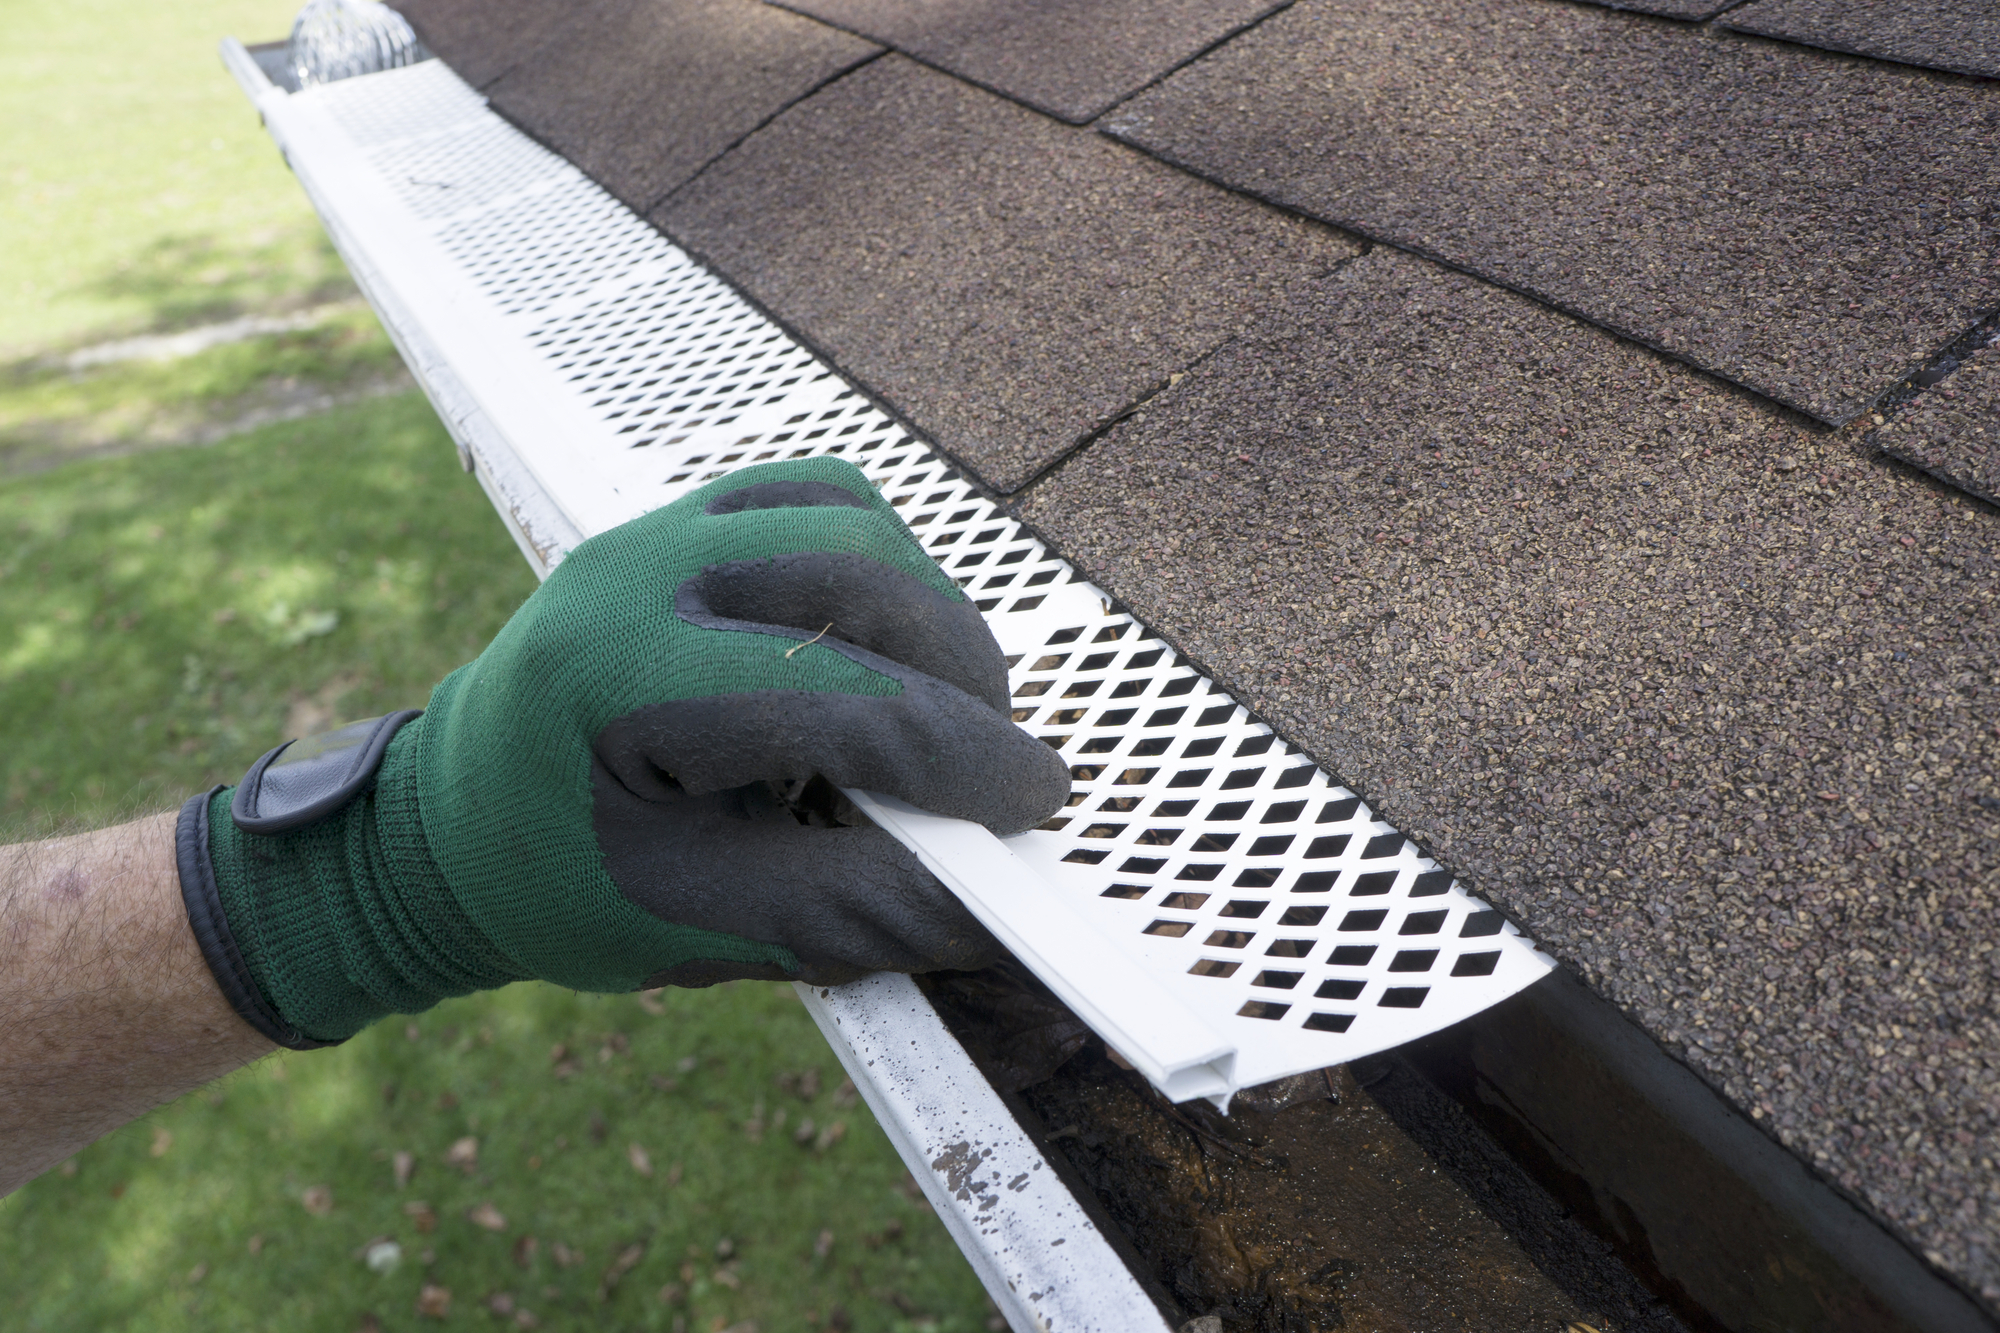 Gutter Cleaning in Moses Lake WA, Gutter Cleaning in Spokane WA, Gutter Cleaning in Yakima WA, Gutter Cleaning in Kennewick WA, Gutter Cleaning in Pasco WA, Gutter Cleaning in Richland WA, Gutter Cleaning in Coeur D'ALene ID, Gutter Cleaning in Wenatchee WA, Gutter Cleaning in Ellensburg WA, Gutter Cleaning in West Richland WA, Gutter Cleaning in East Wenatchee WA, Gutter Cleaning in Cheney WA, Gutter Cleaning in Airway Heights WA, Gutter Cleaning in Terrace Heights WA, Gutter Cleaning in Othello WA, Gutter Cleaning in Ephrata WA, Gutter Cleaning in Selah WA, Gutter Cleaning in Quincy WA, Gutter Cleaning in Connell WA, Gutter Cleaning in Medical Lake WA, Gutter Cleaning in Mattawa WA, Gutter Cleaning in Chelan WA, Gutter Cleaning in Cle Elum WA, Gutter Cleaning in Warden WA, Gutter Cleaning in Leavenworth WA, Gutter Cleaning in Royal City WA, Gutter Cleaning in Ritzville WA, Gutter Cleaning in Soap Lake WA, Gutter Cleaning in Basin City WA, Gutter Cleaning in Lind WA